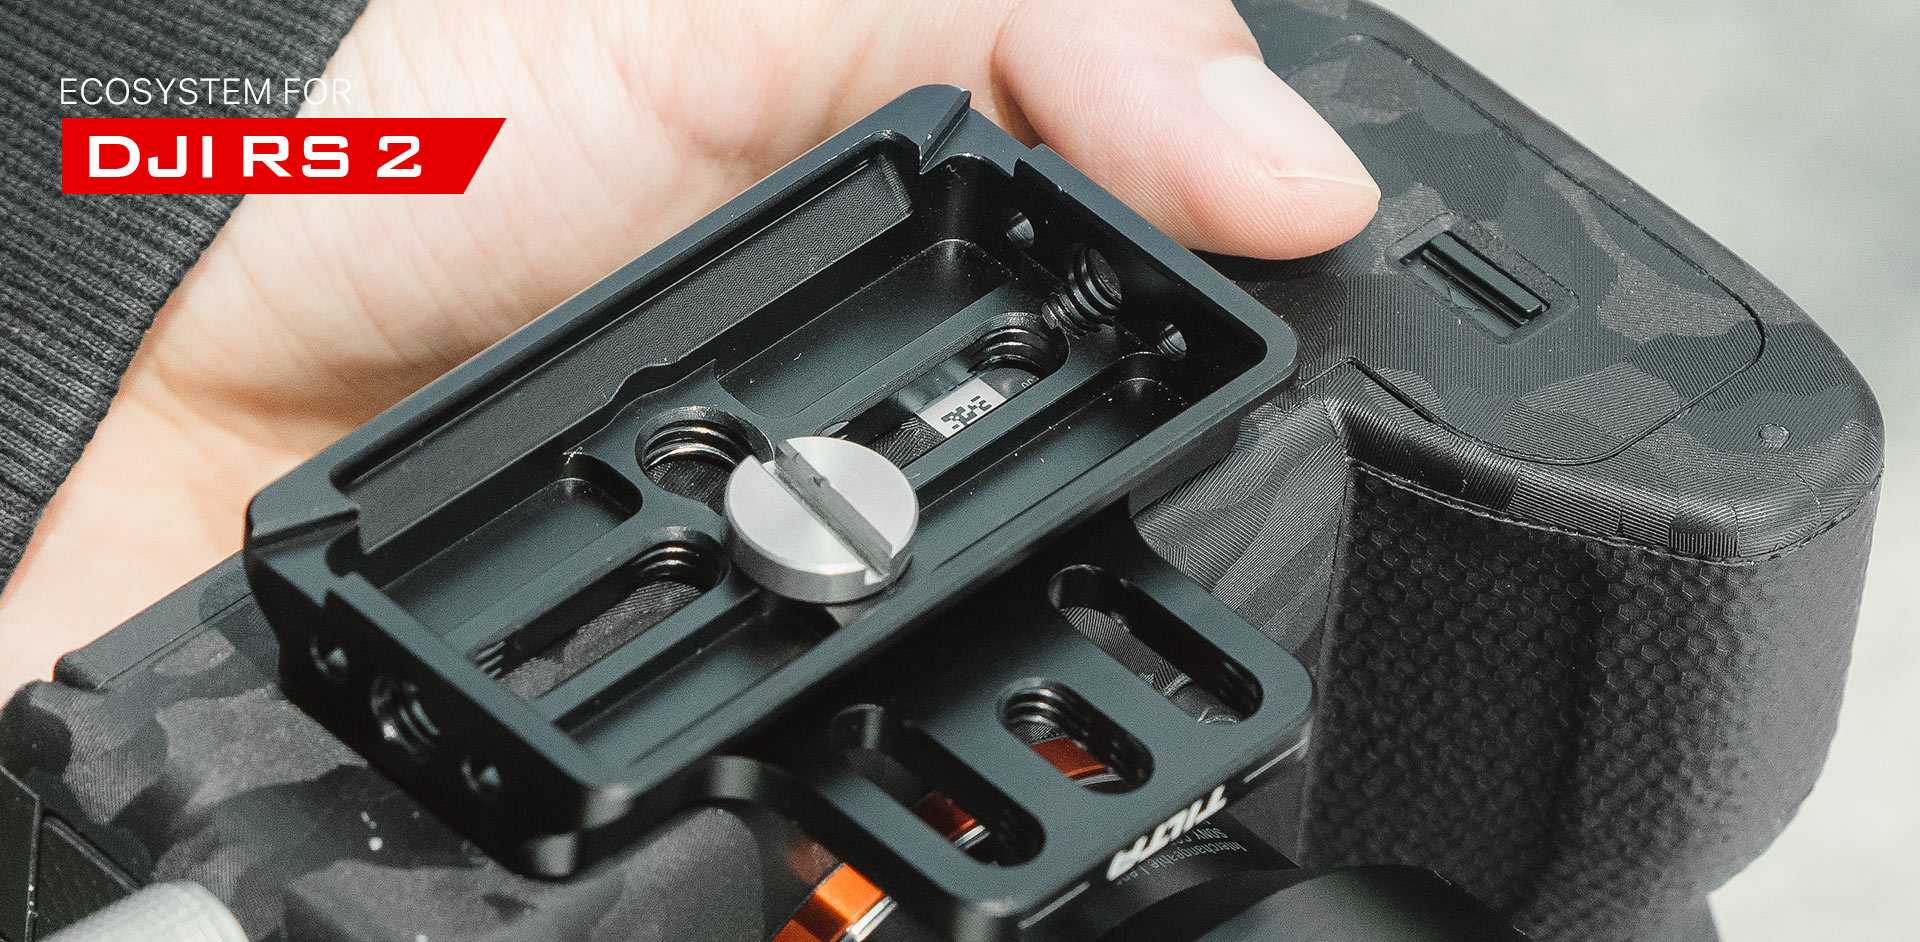 extended quick release-base-plate for DJI rs2